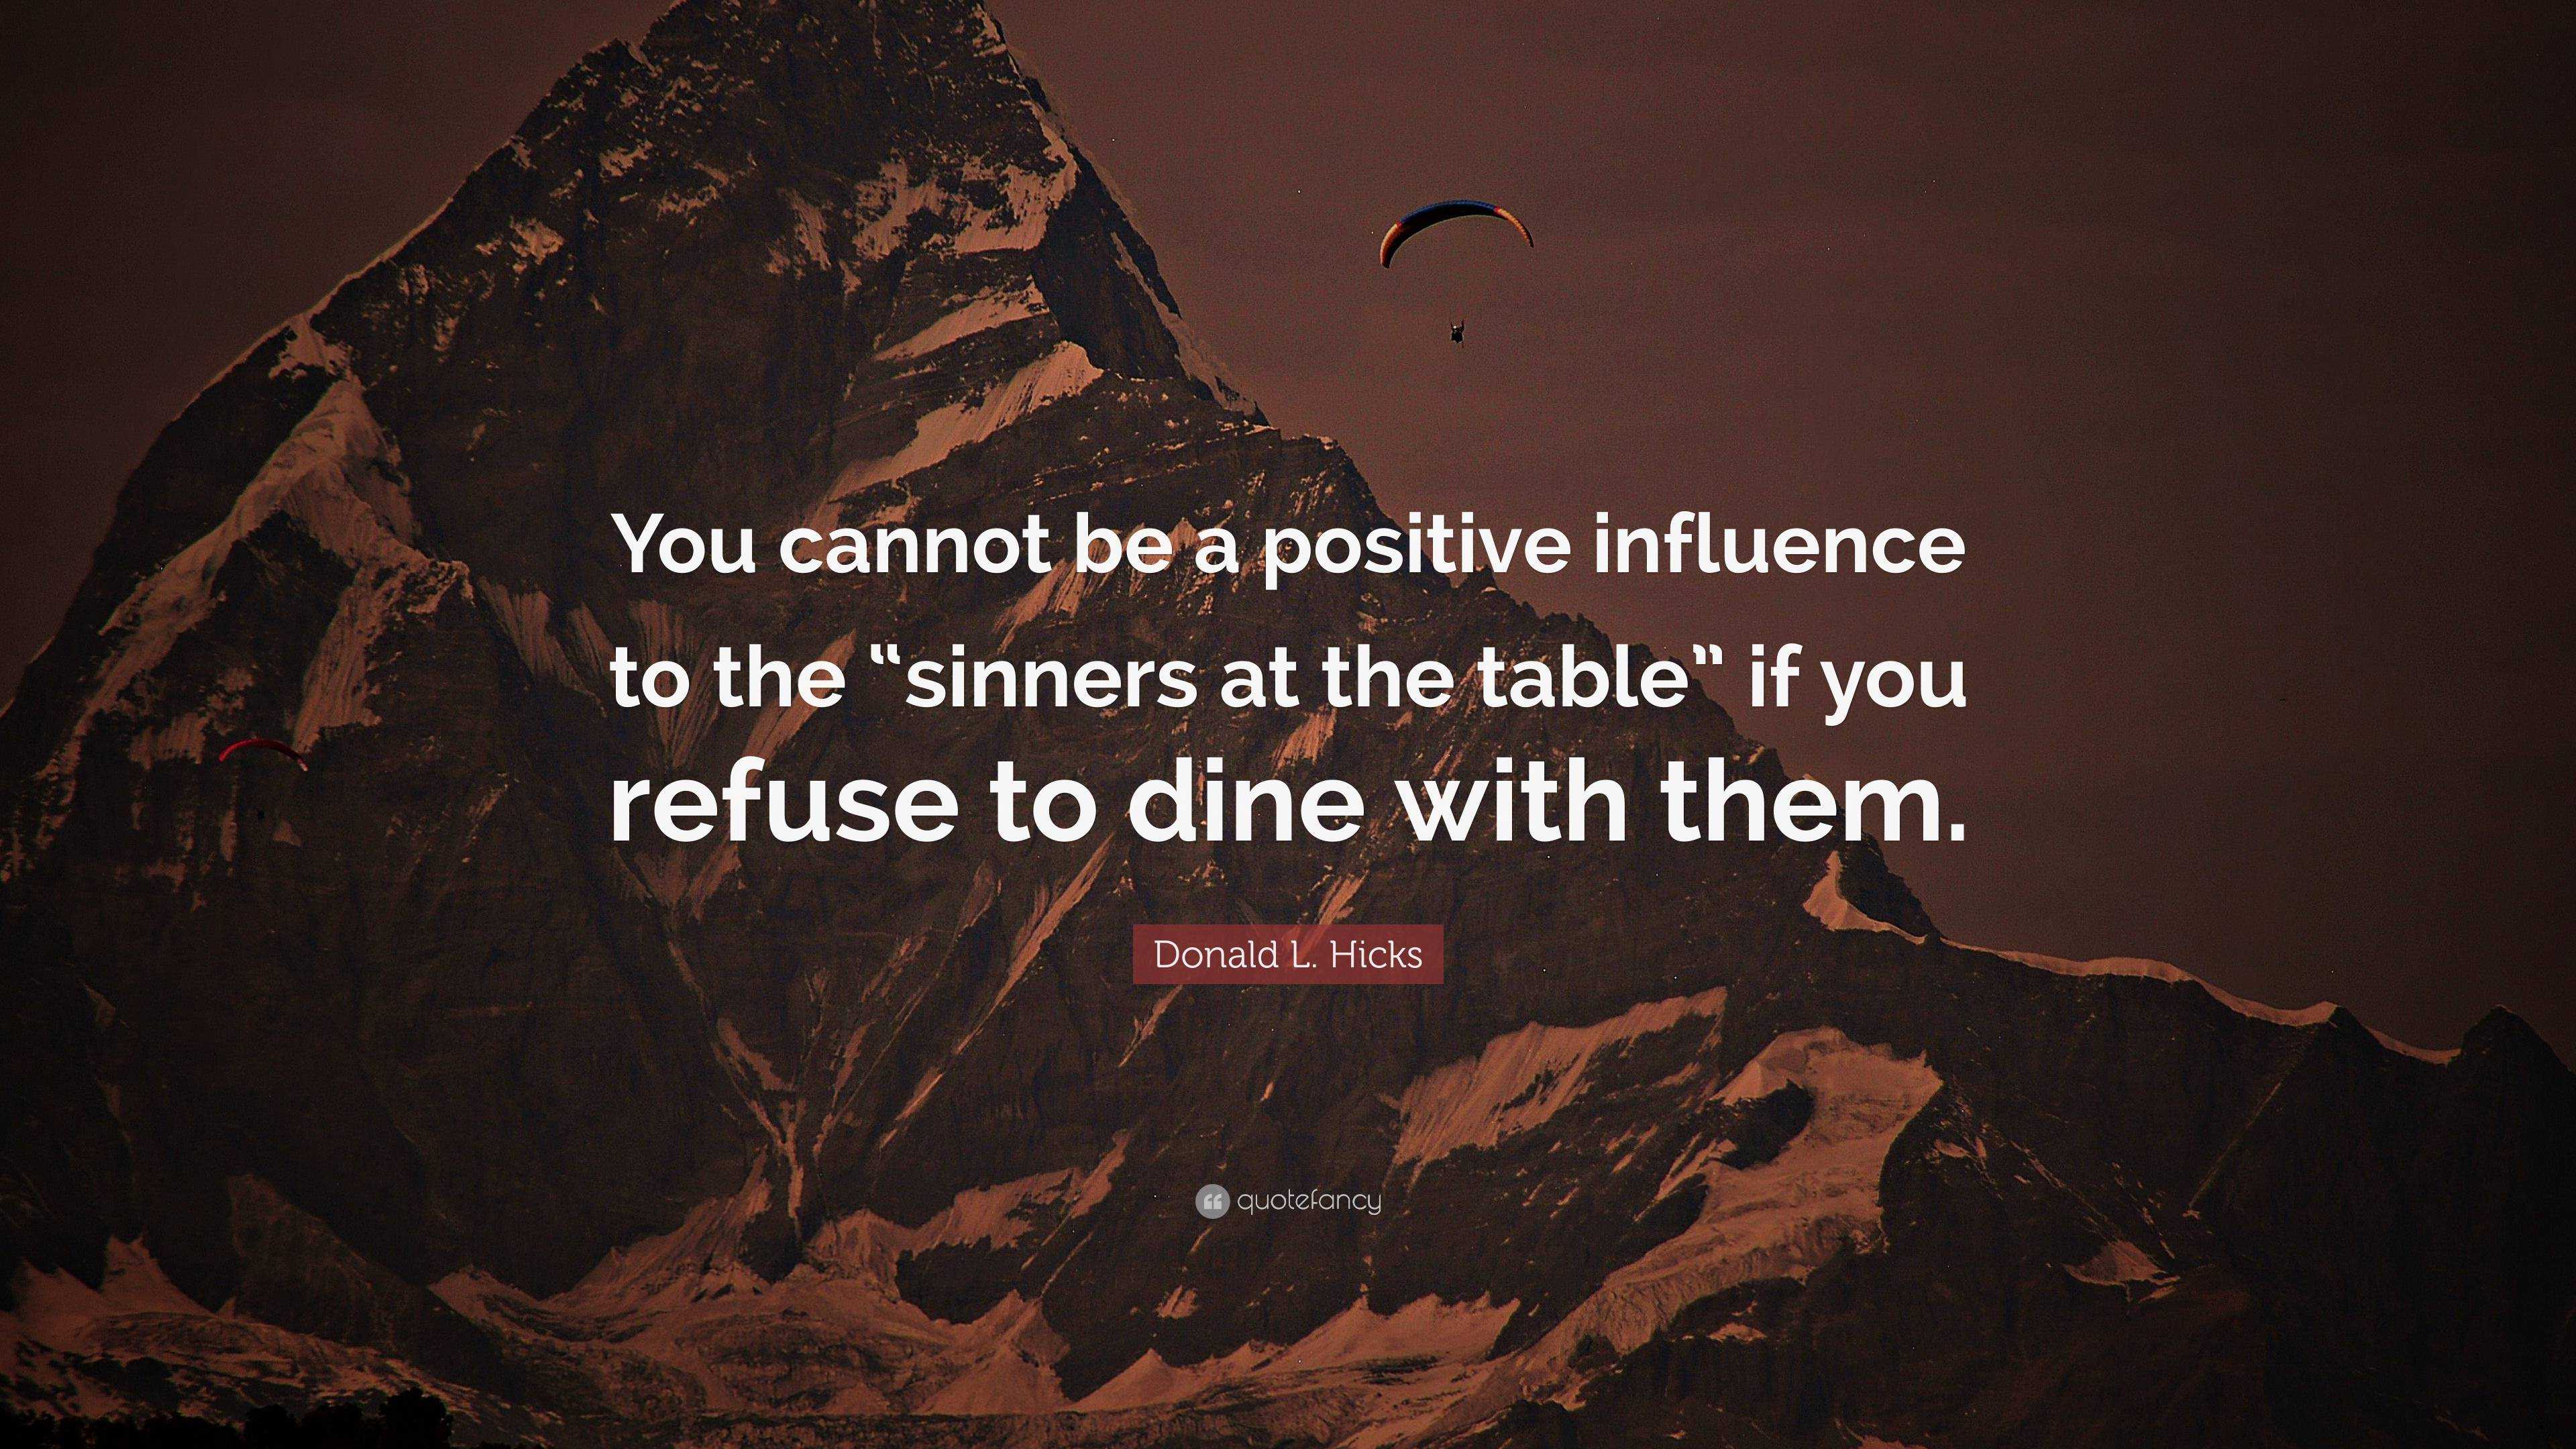 Donald L. Hicks Quote: “You cannot be a positive influence to the